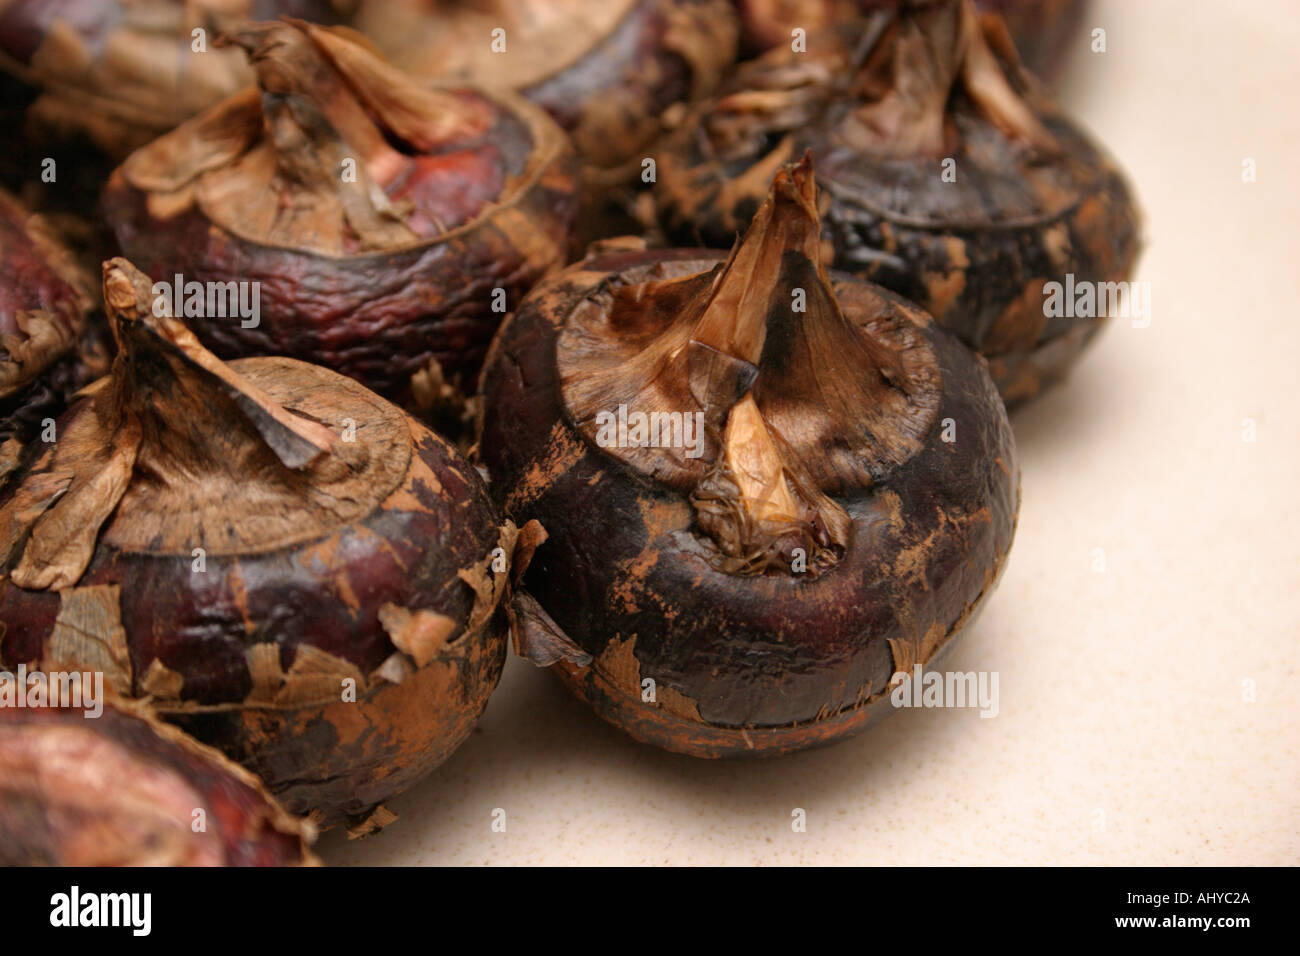 Chinese water chestnut Root of aquatic plant Eleocharis dulcis Sweet nutty flavour with white flesh Eaten raw as dessert or Stock Photo